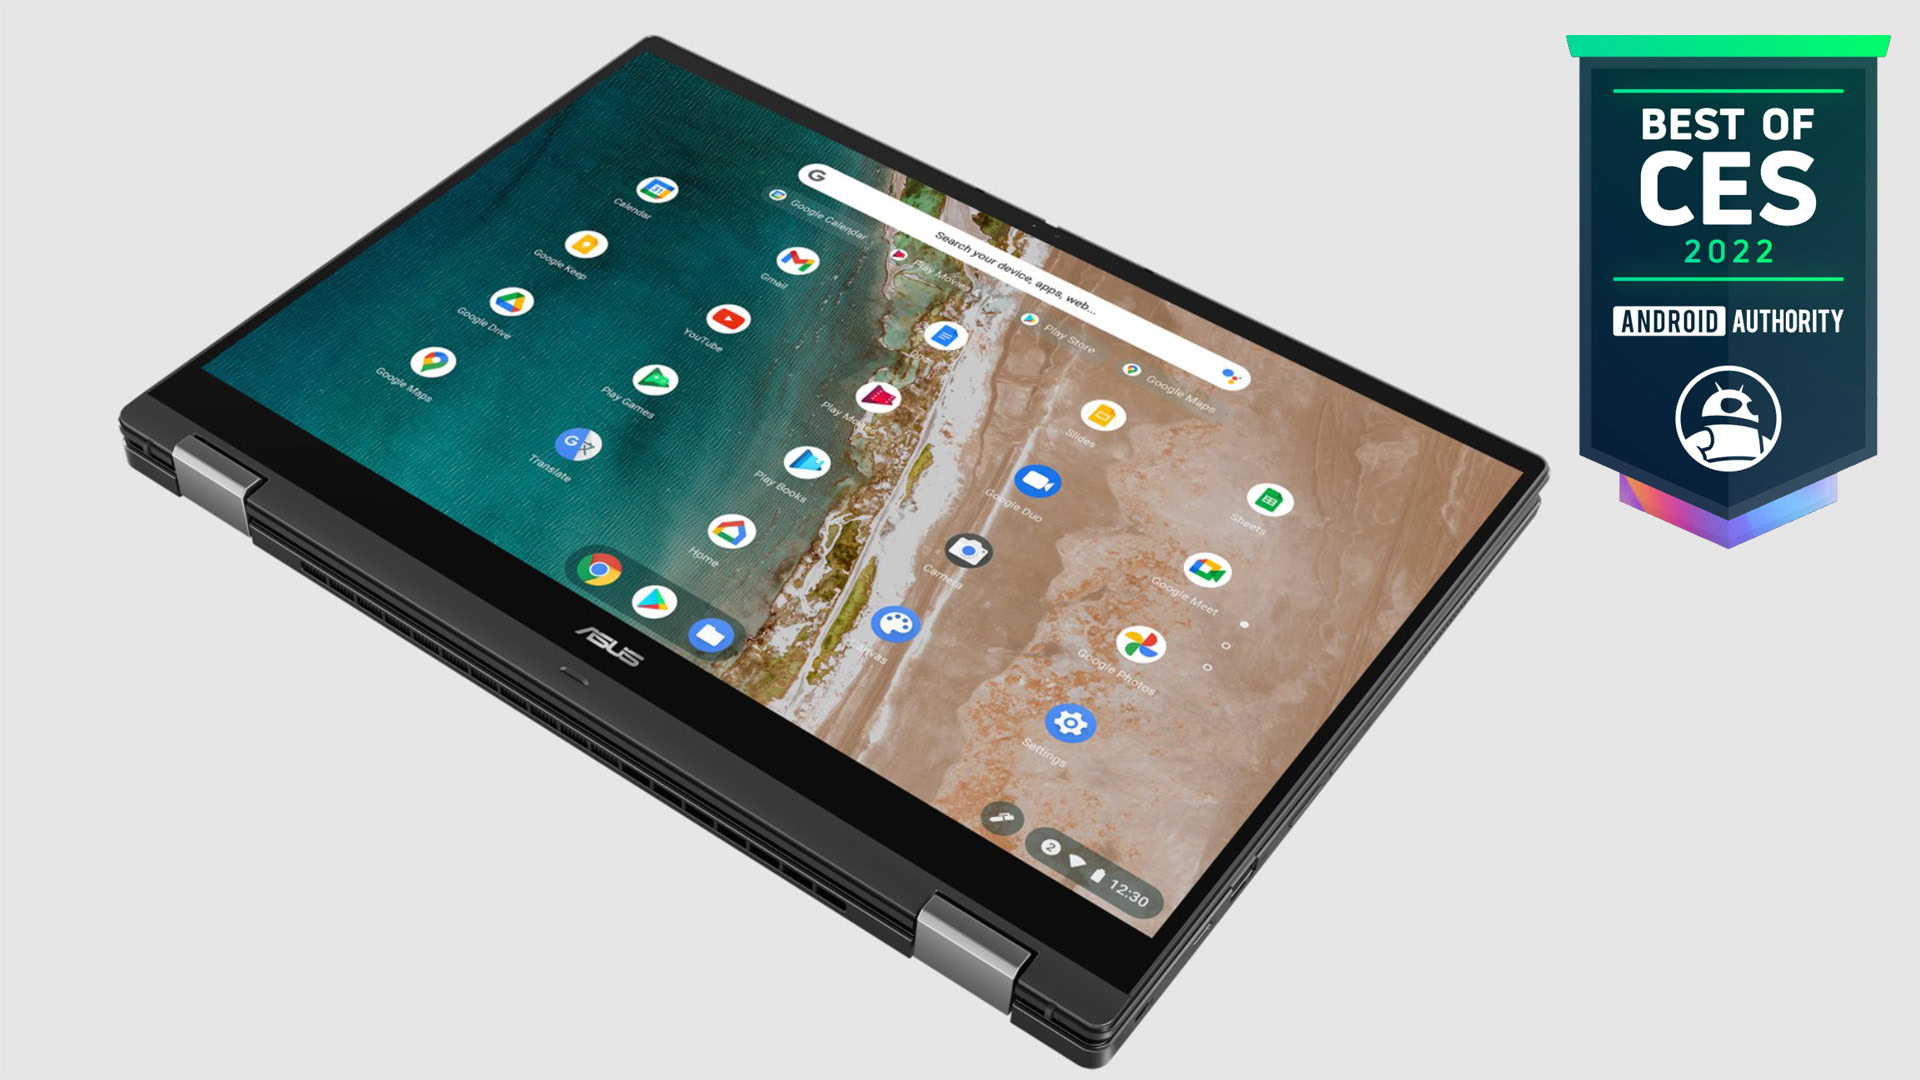 Asus Chromebook Flip CX5 Android Authority Best of CES 2022 Award winner